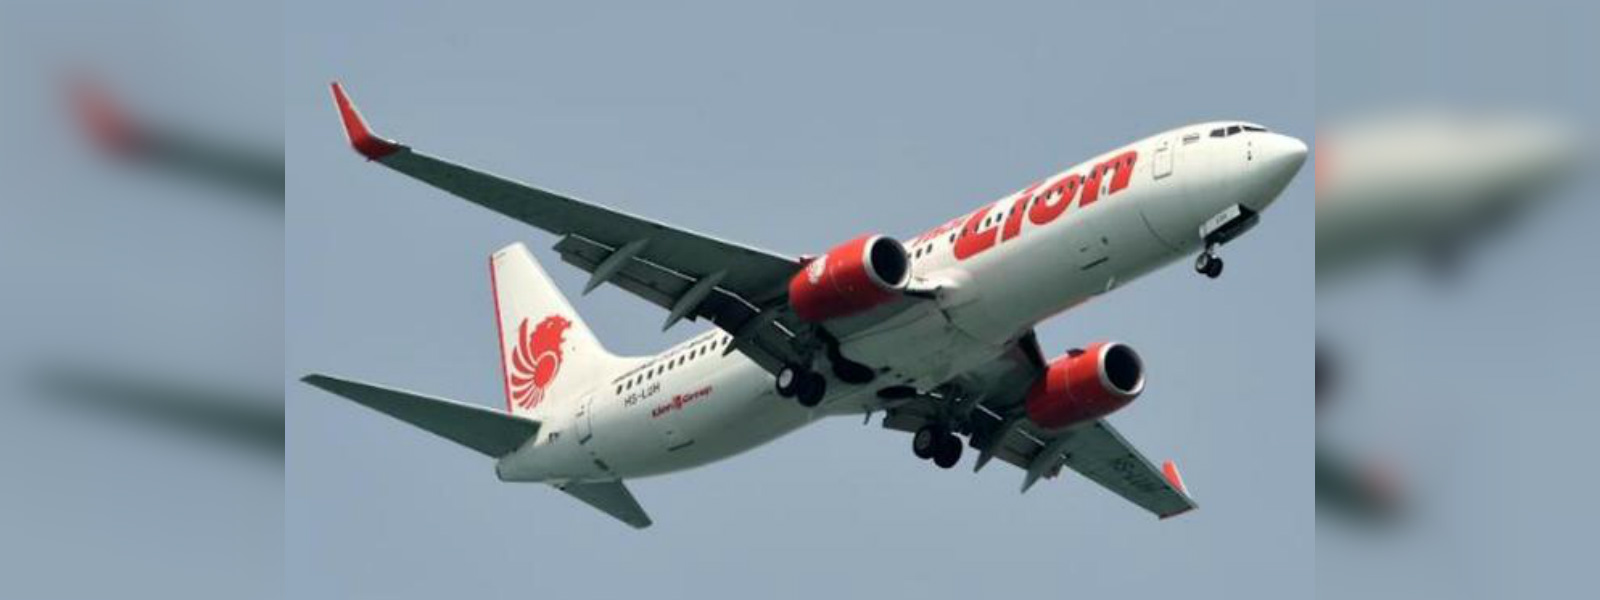 Lion Air instructed to improve safety culture